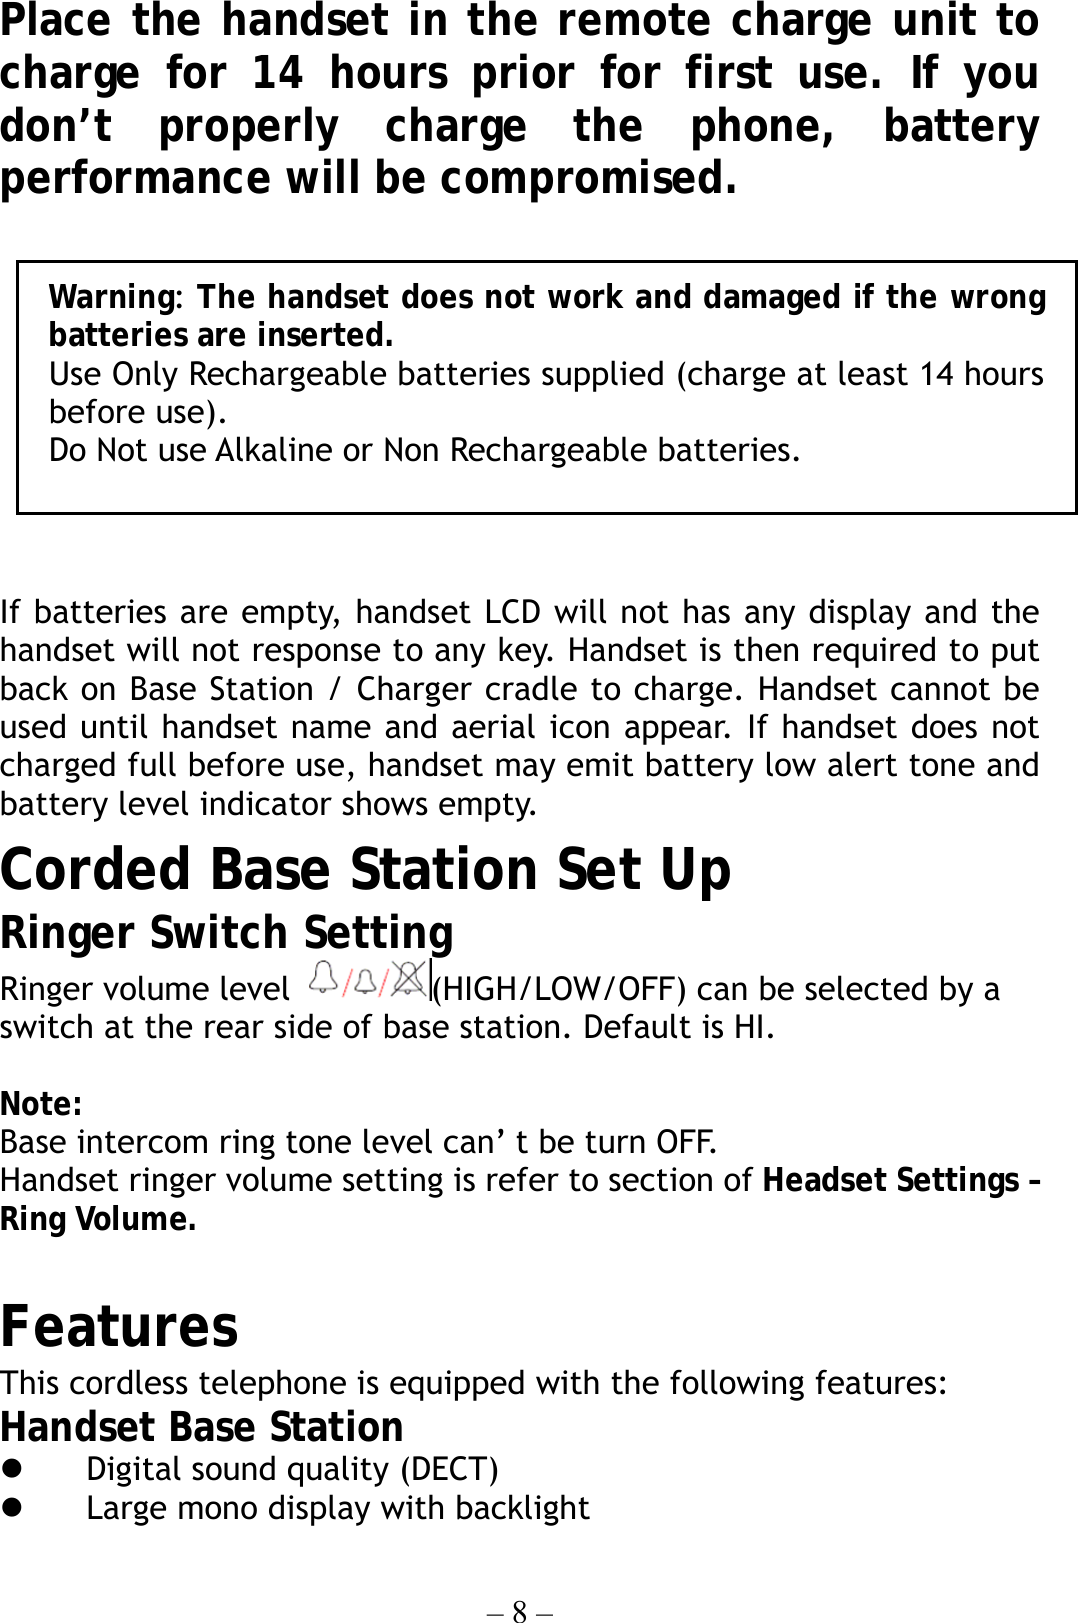 – 8 – Place the handset in the remote charge unit to charge for 14 hours prior for first use. If you don’t properly charge the phone, battery performance will be compromised.   If batteries are empty, handset LCD will not has any display and the handset will not response to any key. Handset is then required to put back on Base Station / Charger cradle to charge. Handset cannot be used until handset name and aerial icon appear. If handset does not charged full before use, handset may emit battery low alert tone and battery level indicator shows empty. Corded Base Station Set Up Ringer Switch Setting   Ringer volume level  (HIGH/LOW/OFF) can be selected by a switch at the rear side of base station. Default is HI.  Note:  Base intercom ring tone level can’ t be turn OFF. Handset ringer volume setting is refer to section of Headset Settings – Ring Volume.           Features                               This cordless telephone is equipped with the following features: Handset Base Station   Digital sound quality (DECT)       Large mono display with backlight     Warning: The handset does not work and damaged if the wrongbatteries are inserted. Use Only Rechargeable batteries supplied (charge at least 14 hoursbefore use). Do Not use Alkaline or Non Rechargeable batteries. 